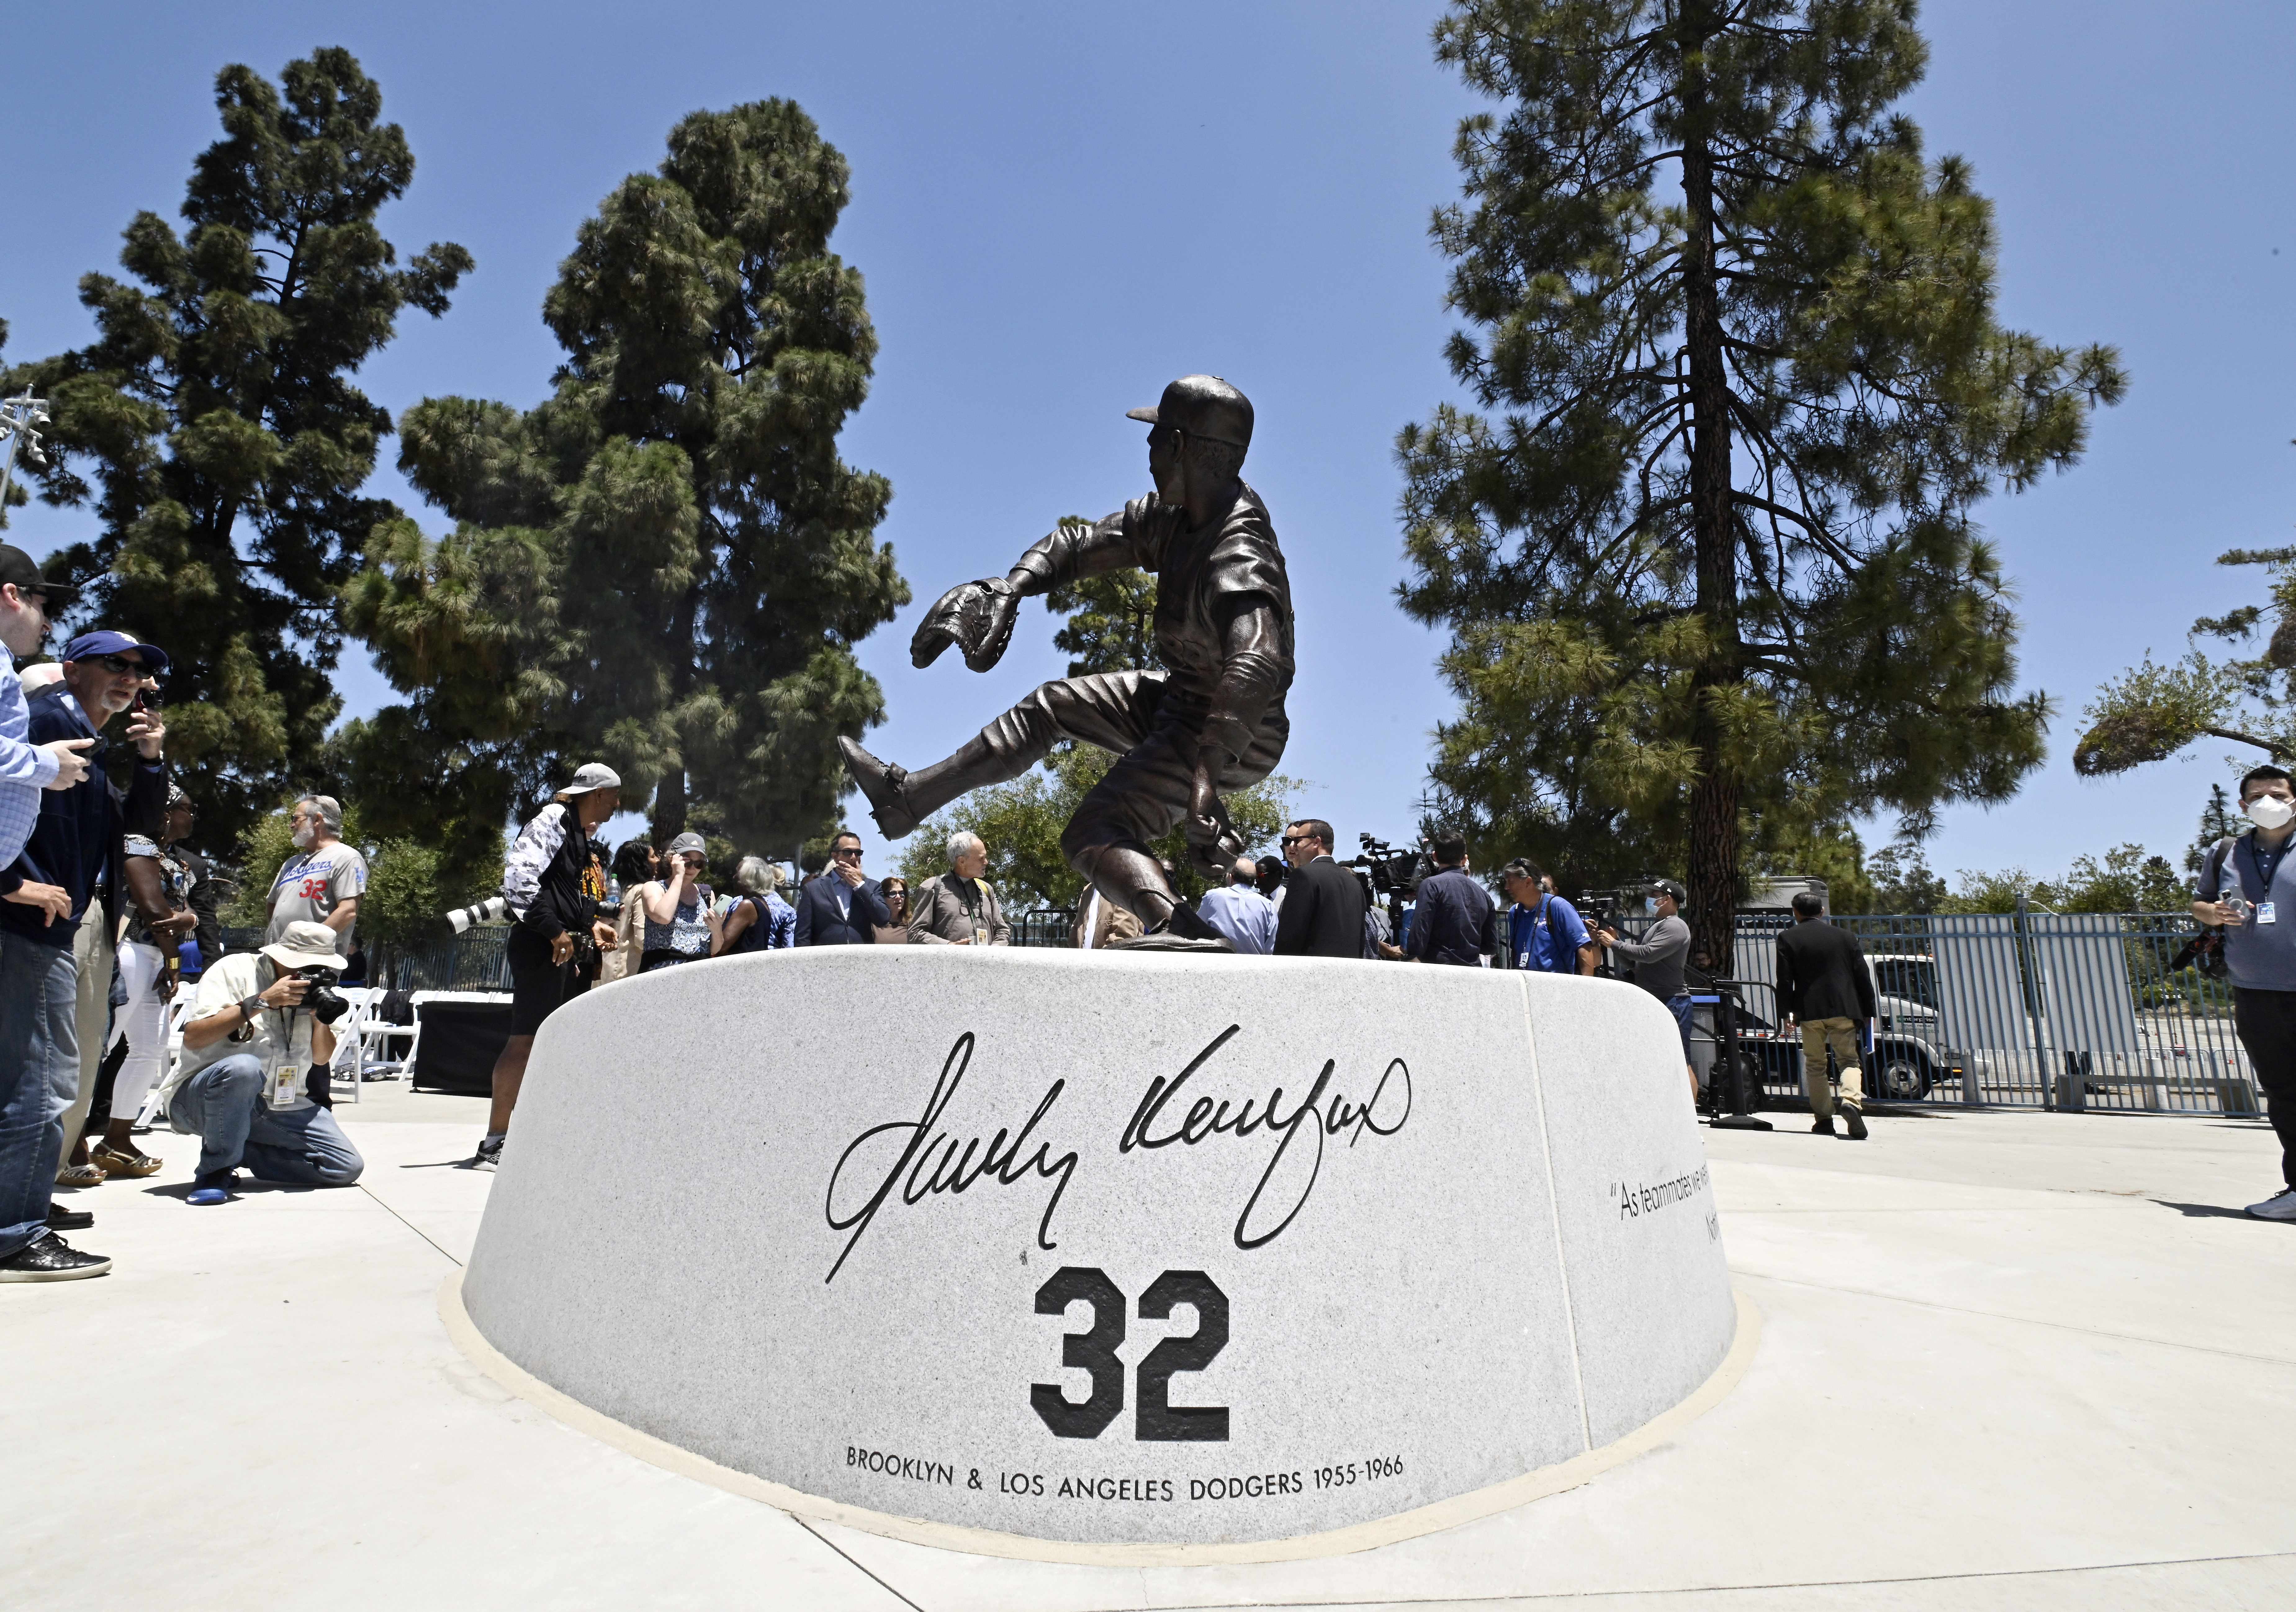 A New Los Angeles Dodgers Owner Honors His Immigrant Father